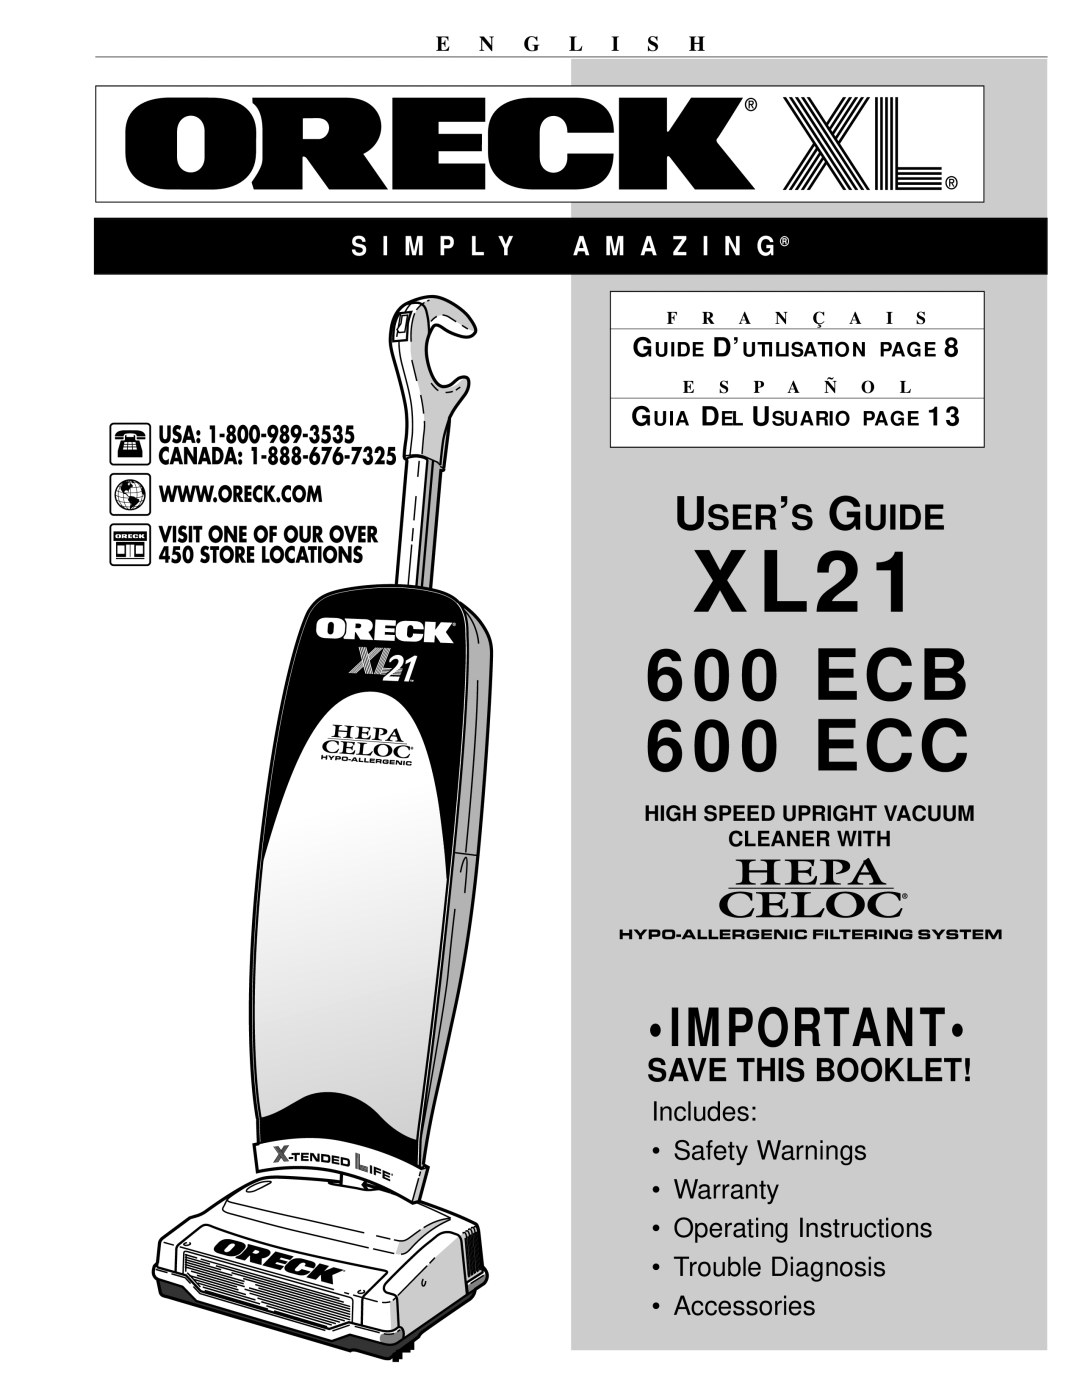 Oreck warranty E N G L I S H, High Speed Upright Vacuum Cleaner With, Guide D’Utilisation Page, XL21, ECB 600 ECC 